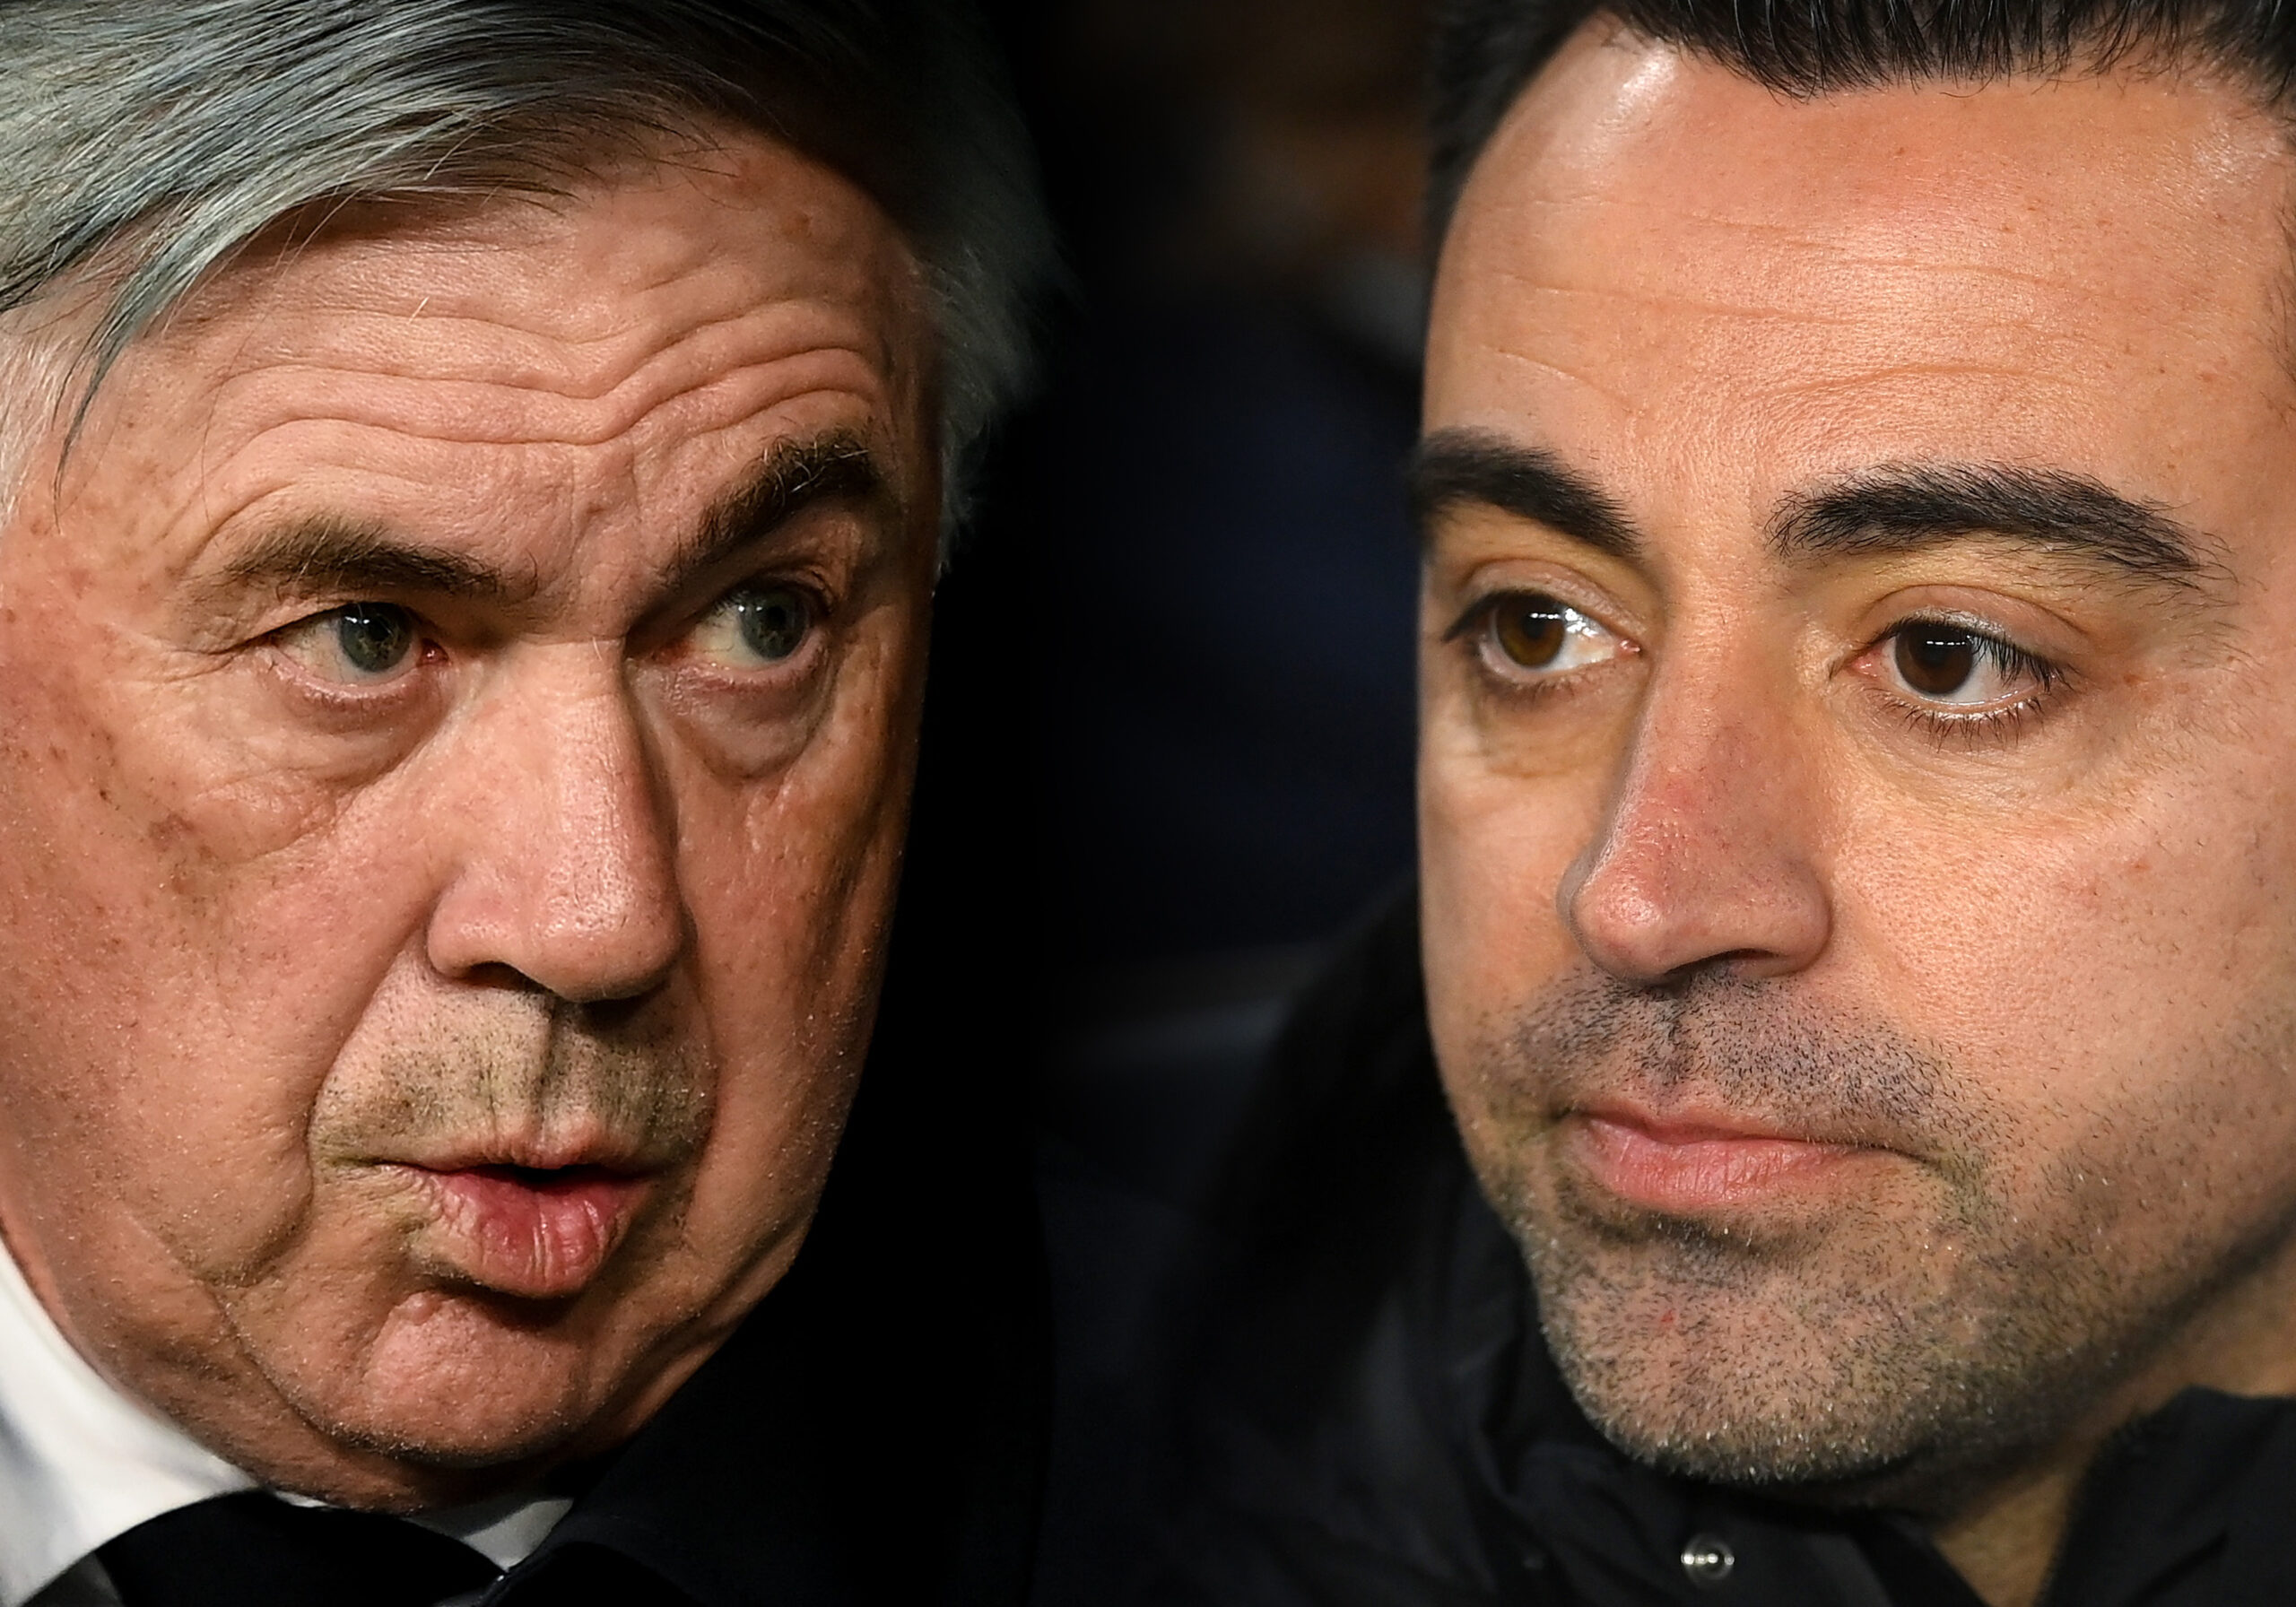 FILE PHOTO (EDITORS NOTE: COMPOSITE OF IMAGES - Image numbers 1395582751, 1389568842 - GRADIENT ADDED) In this composite image a comparison has been made between Head coach Carlo Ancelotti of Real Madrid CF (L) and Head coach Xavi Hernandez of FC Barcelona. Real Madrid and Barcelona meet in El Clásico at the Estadio Santiago Bernabeu on October 16,2022 in Madrid, Spain. ***LEFT IMAGE*** MADRID, SPAIN - MAY 04: Head coach Carlo Ancelotti of Real Madrid CF looks on during the UEFA Champions League Semi Final Leg Two match between Real Madrid and Manchester City at Estadio Santiago Bernabeu on May 04, 2022 in Madrid, Spain. (Photo by David Ramos/Getty Images) ***RIGHT IMAGE*** BARCELONA, SPAIN - APRIL 03: Head coach Xavi Hernandez of FC Barcelona looks on during the LaLiga Santander match between FC Barcelona and Sevilla FC at Camp Nou on April 03, 2022 in Barcelona, Spain.